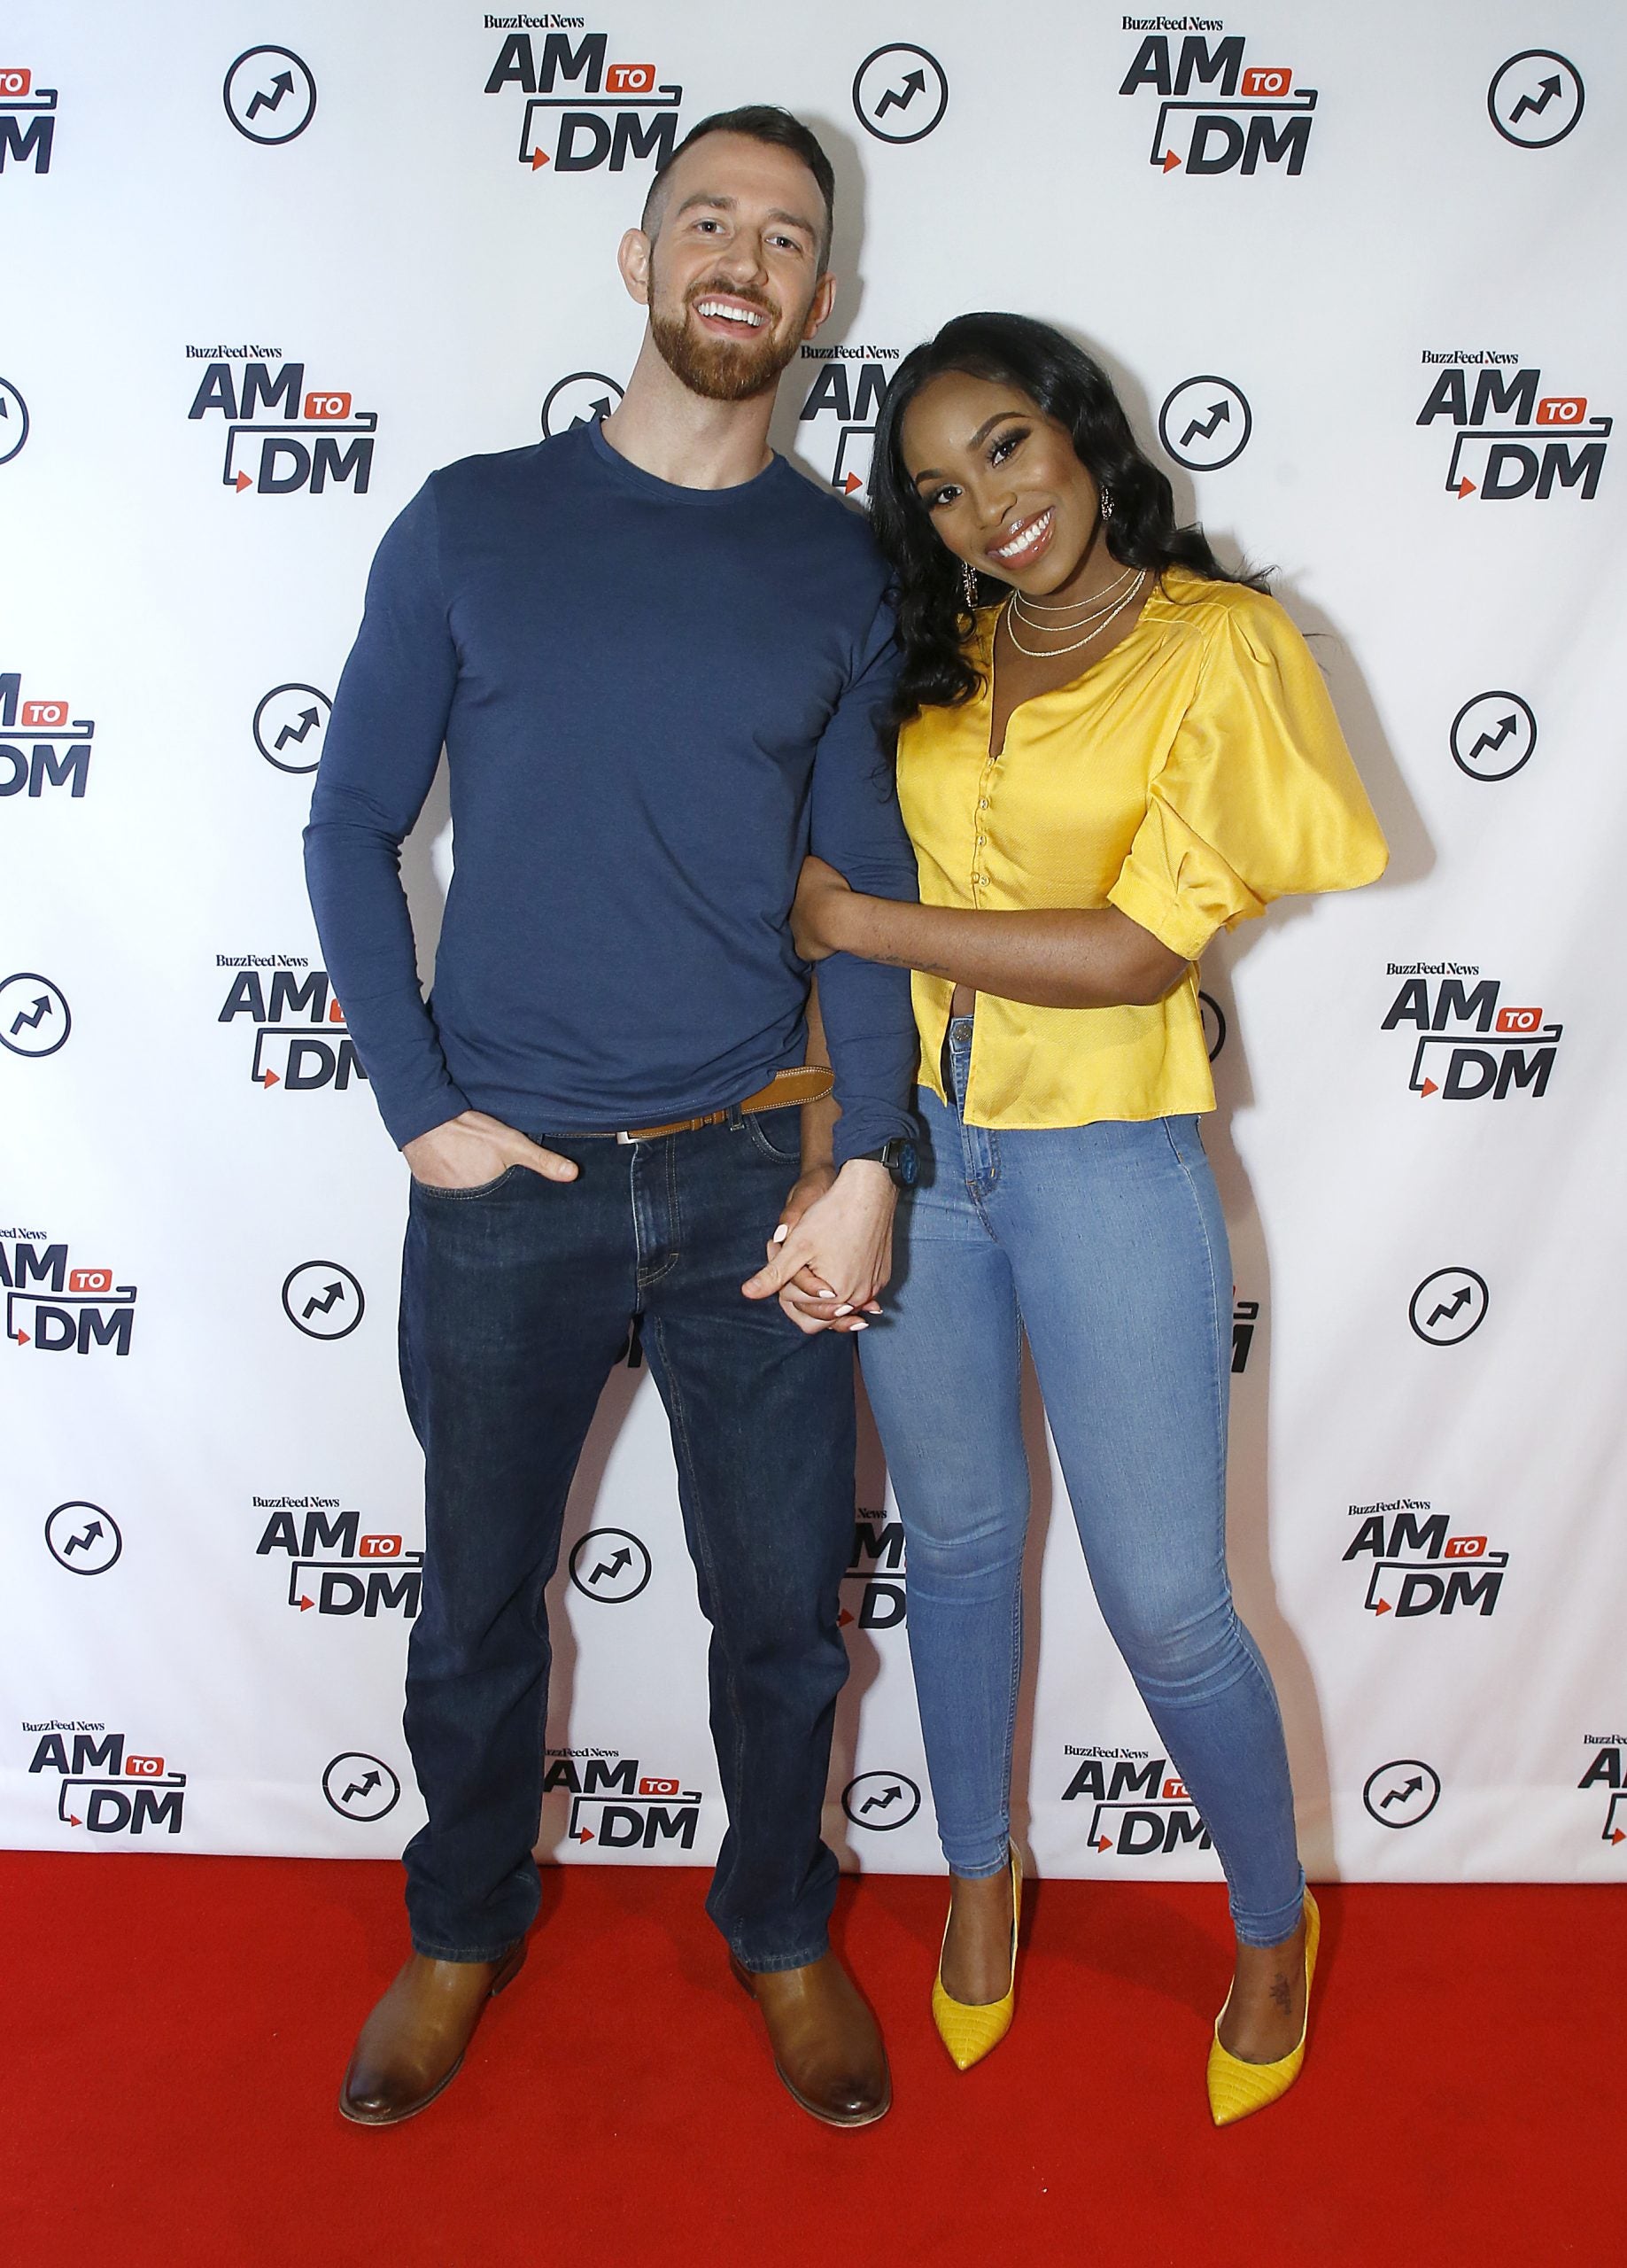 'Love Is Blind's' Lauren And Cameron, Lena Waithe And More Celebs Out And About